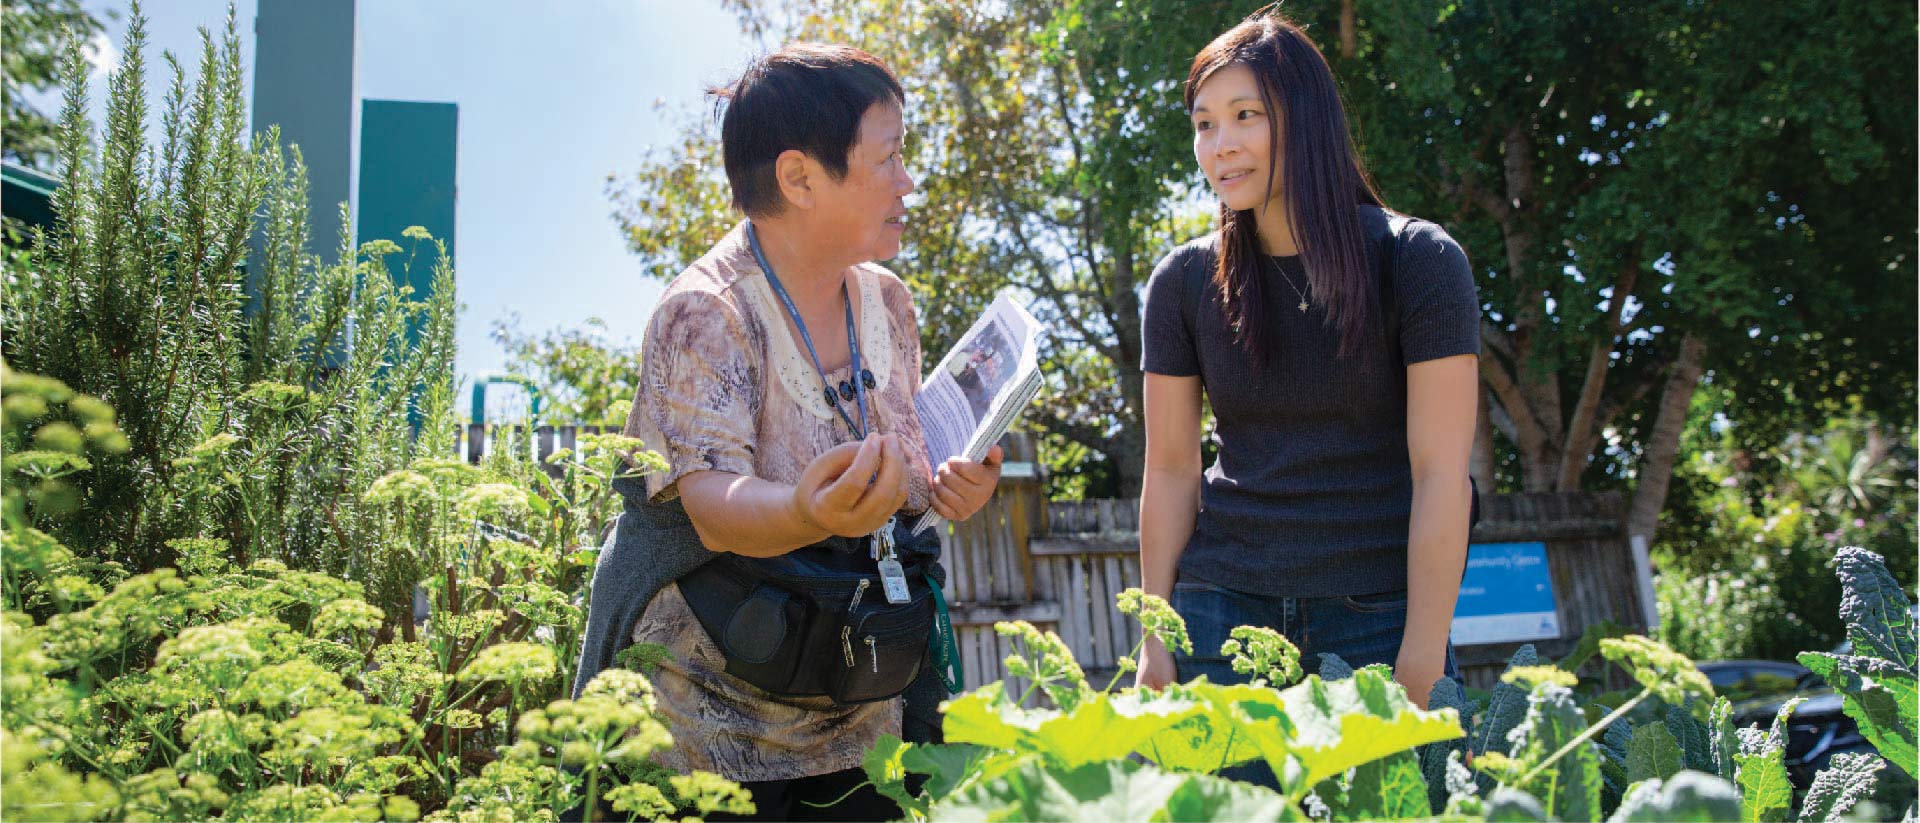 Two people in a community garden surrounded by vegetables and herbs.